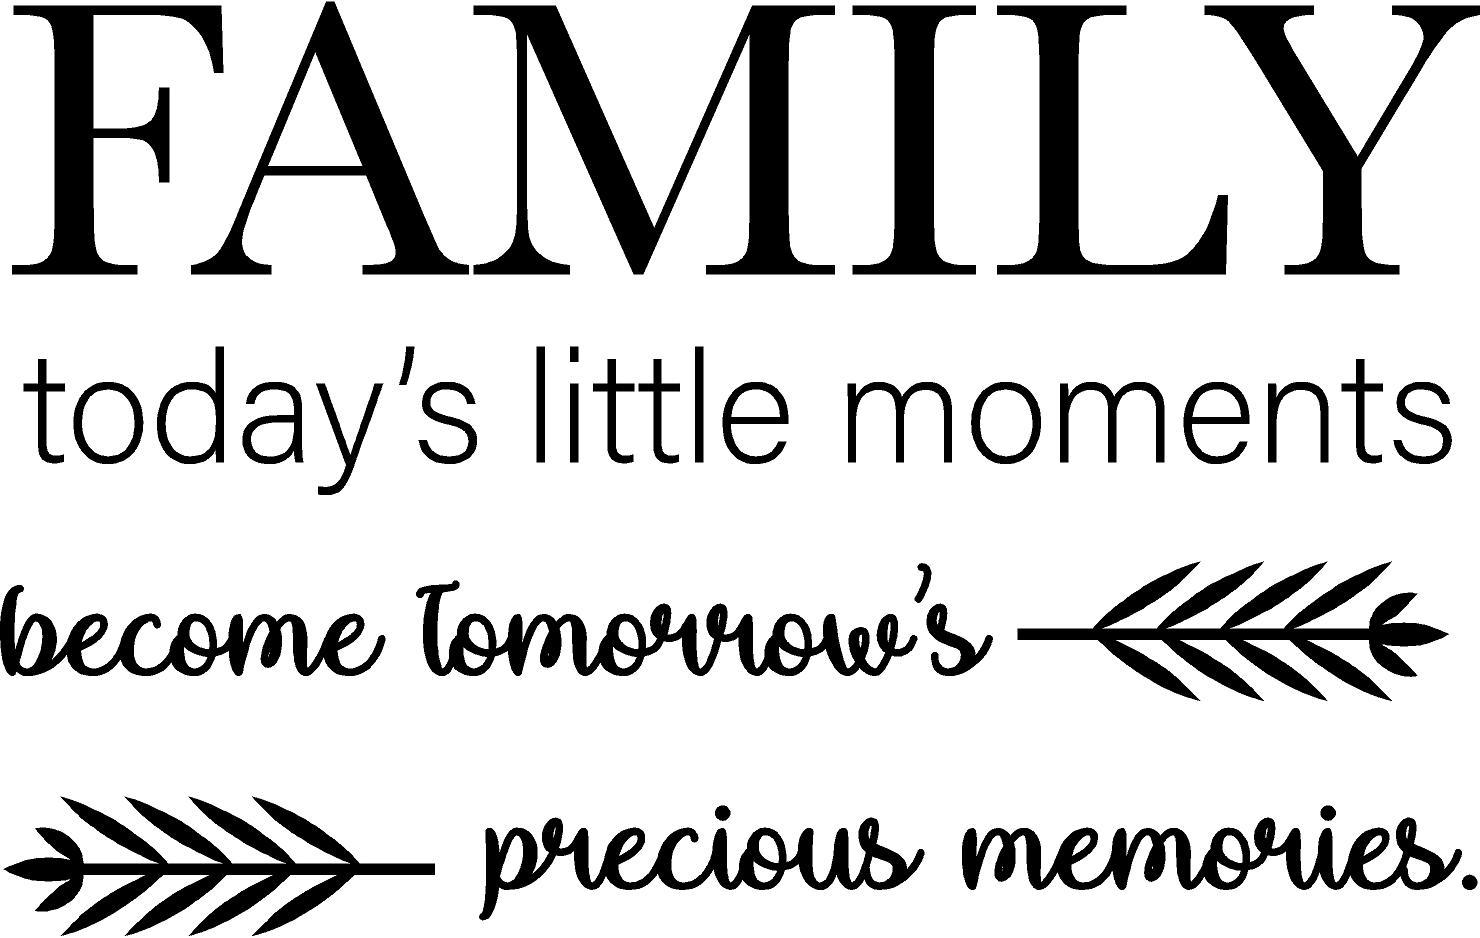 Adhesive Home Wall Art Lettering Quotes Decal 12" x 20" |Family Today's Little Moments Become Tomorrow's Precious Moments - DIY Vinyl Stick And Peel Wall Bedroom Living Room Decoration Sticker - image 1 of 4